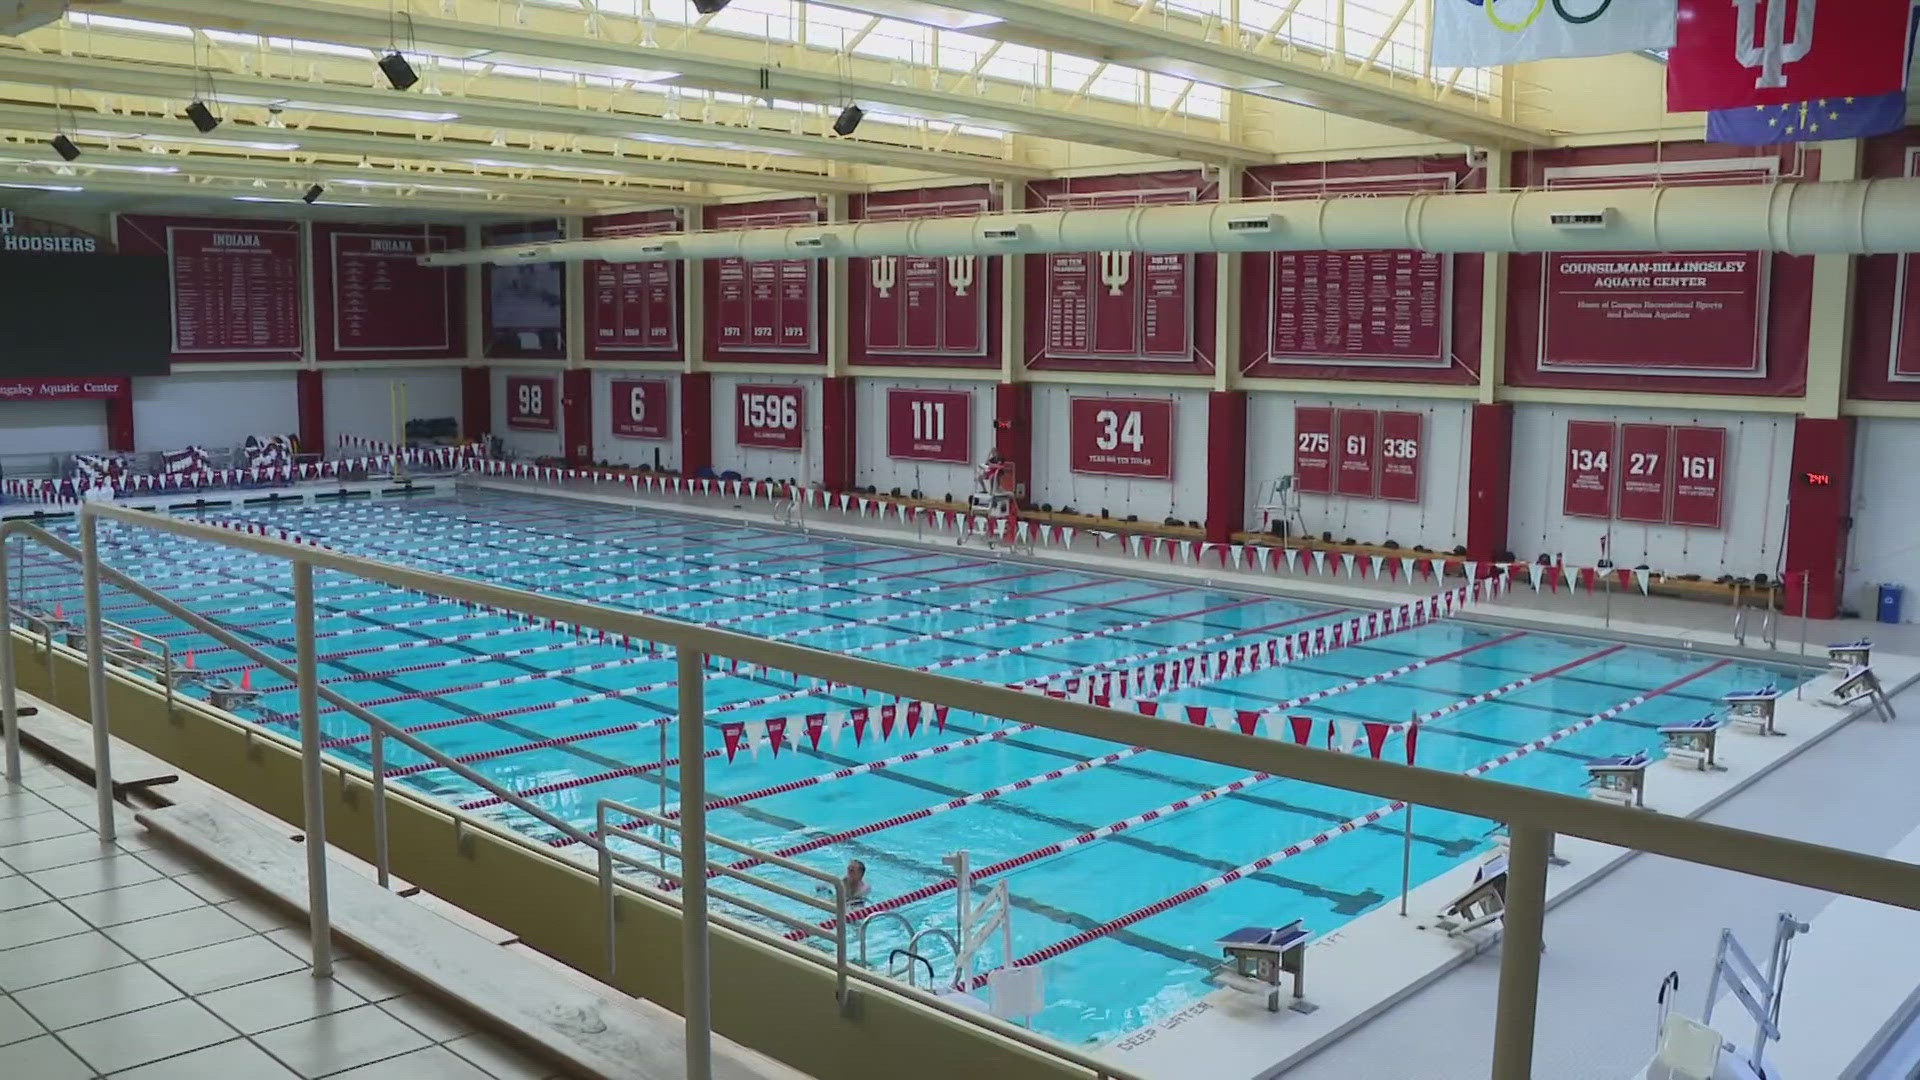 13News anchor Anne Marie Tiernon discusses IU athletics impact on Olympic swimming and diving.